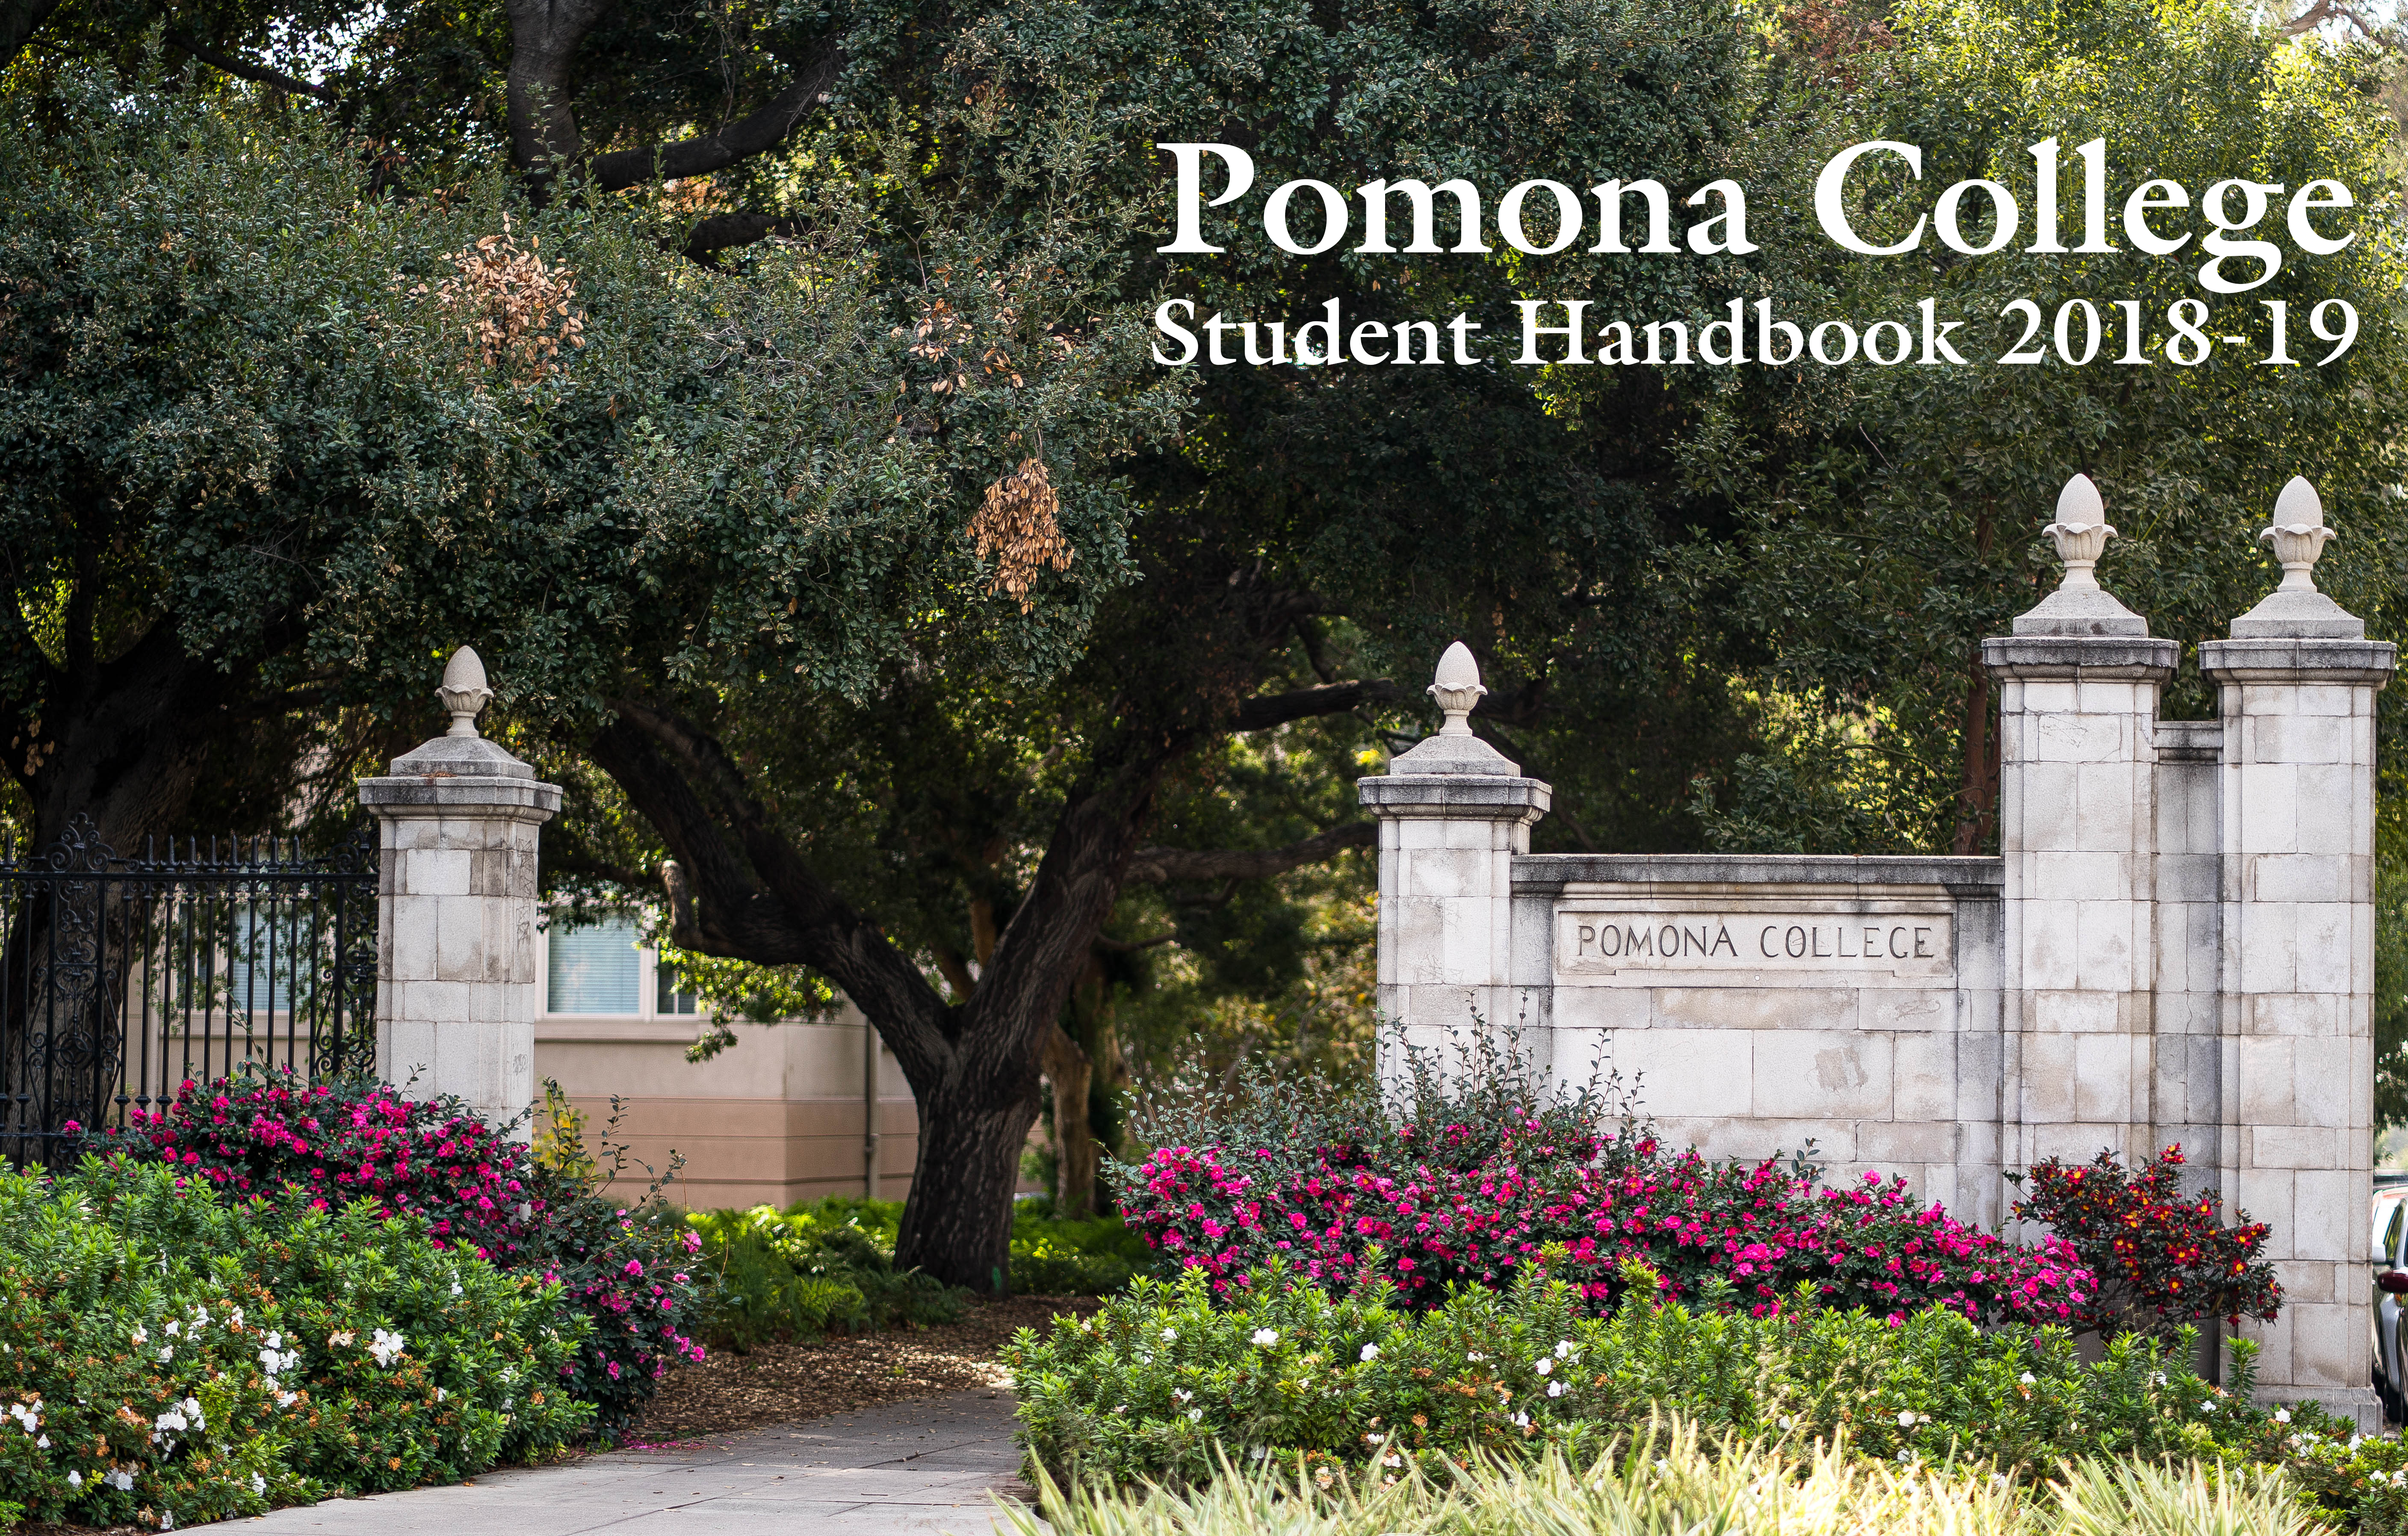 Pomona College entry gates on the corner of College Avenue and 6th Street